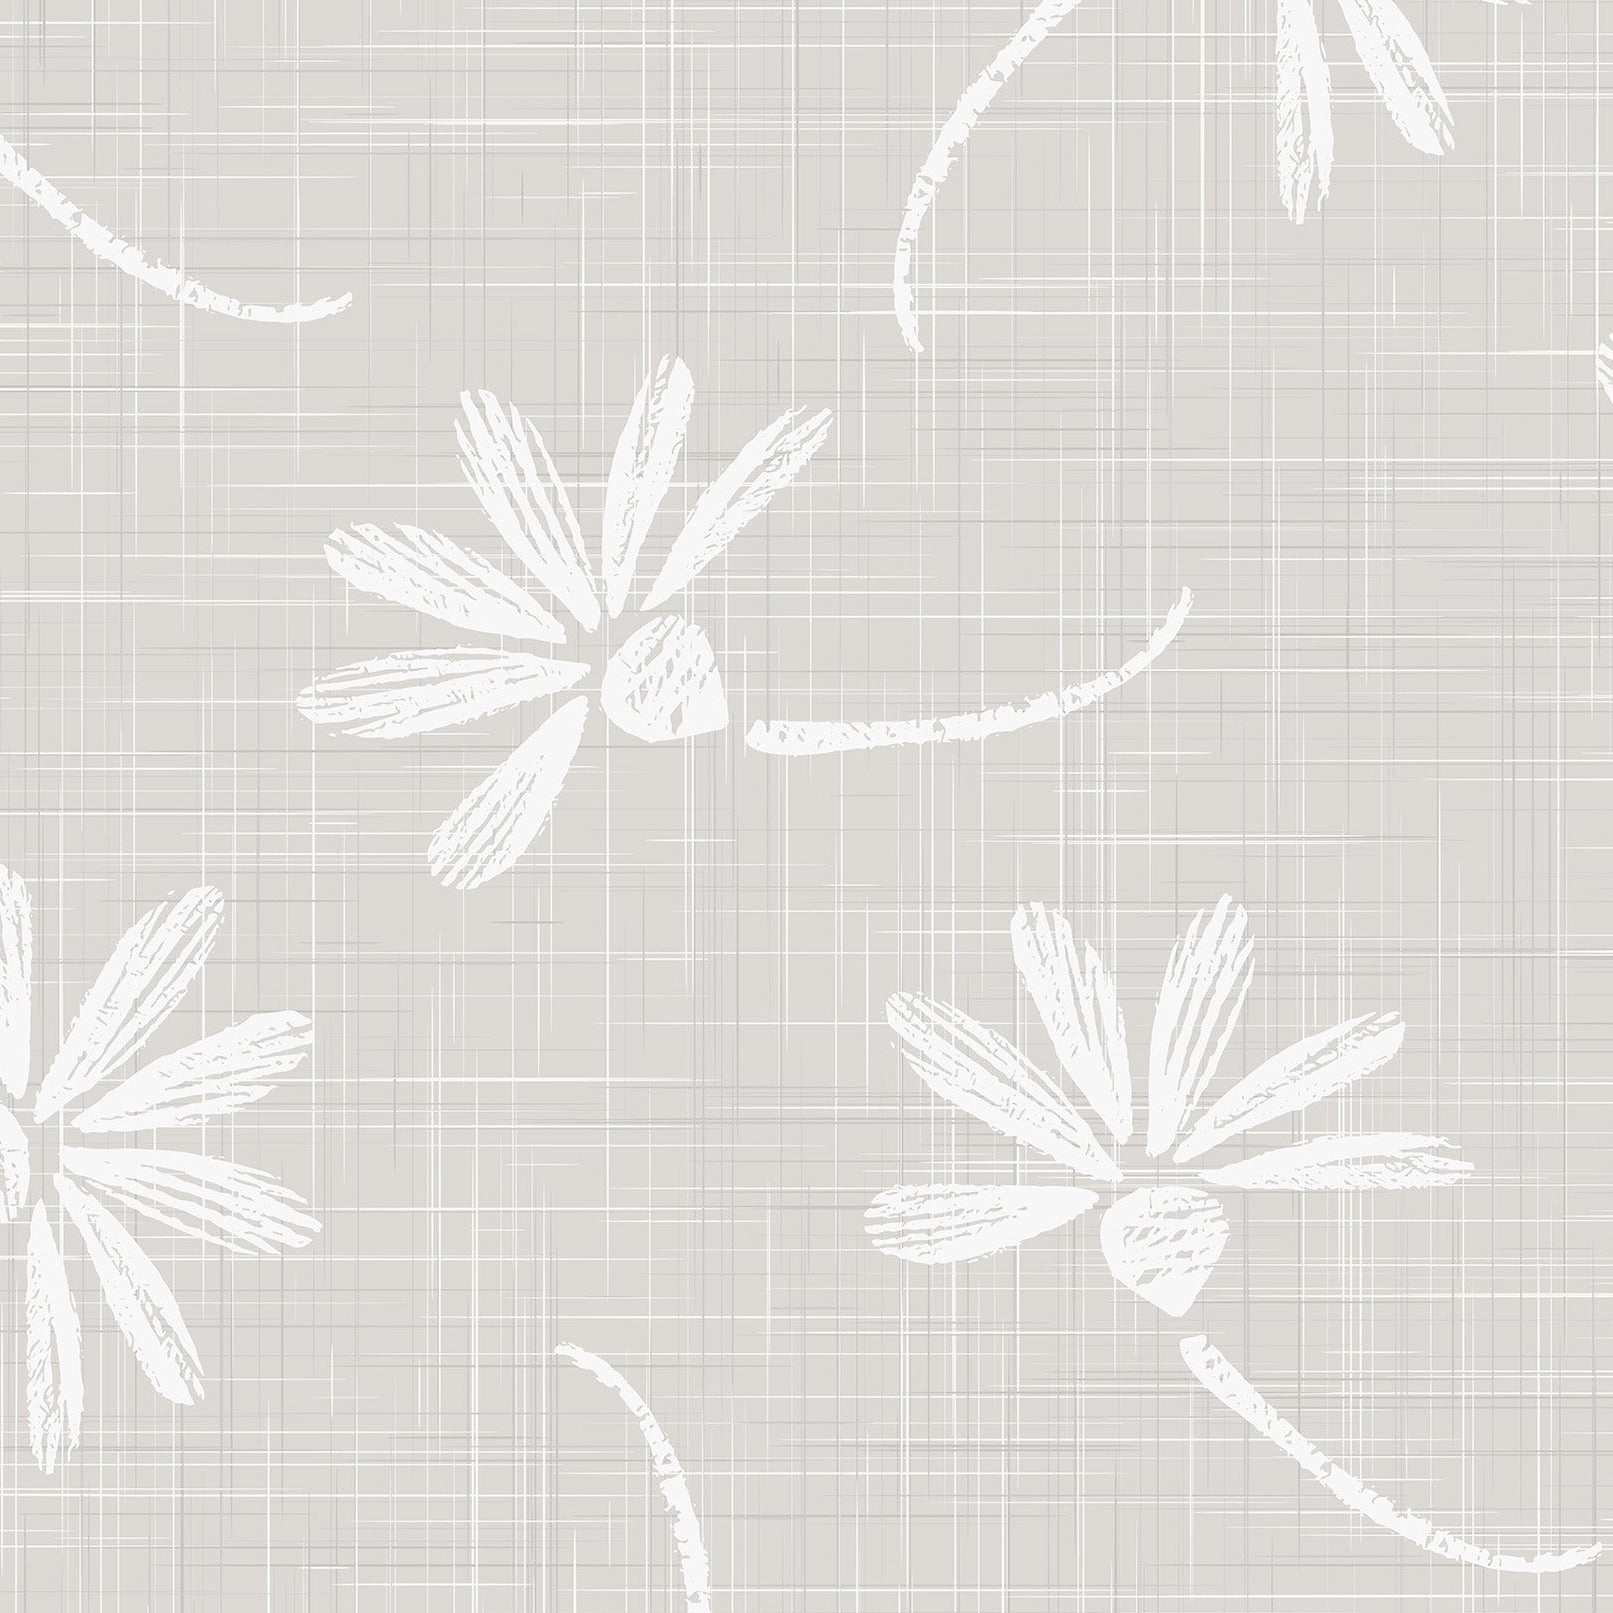 A close-up of the "French Linen Floral Wallpaper," showcasing the elegant detail of the white floral sketches against the grey linen-textured backdrop. The design exudes a chic, effortless style reminiscent of French countryside aesthetics.